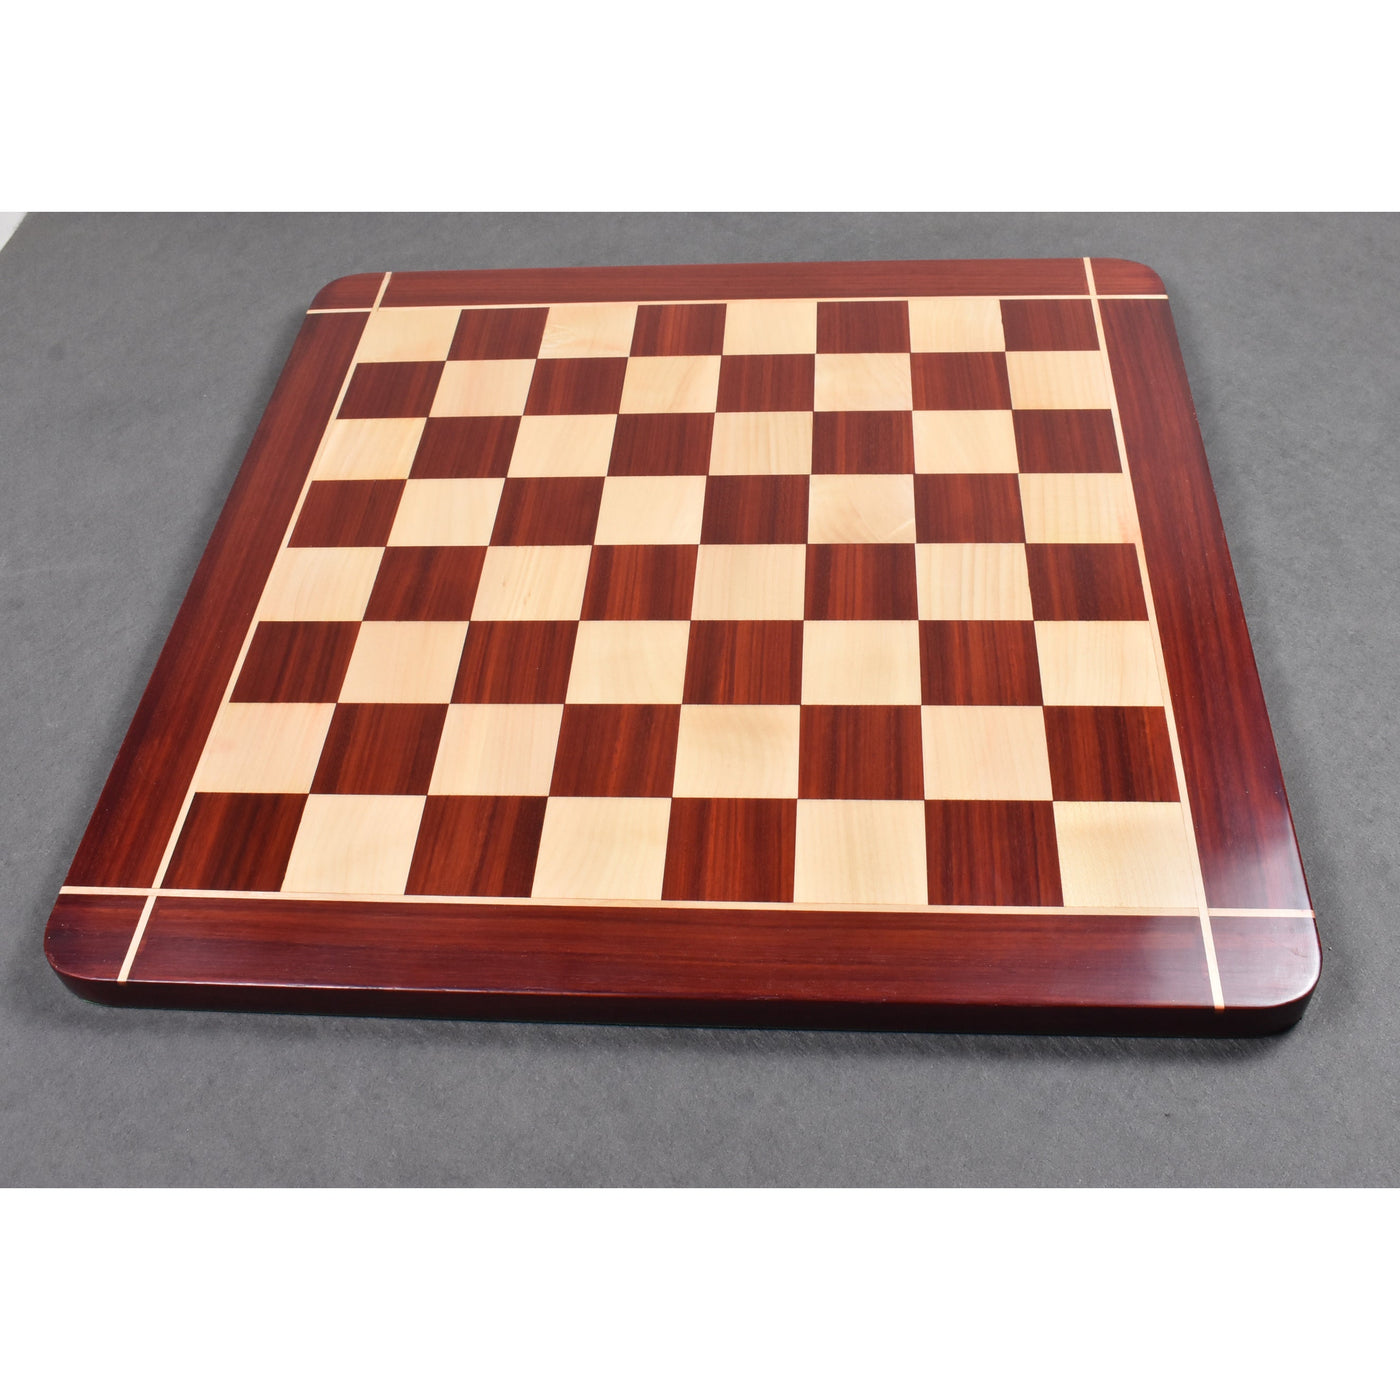 4.6" Mogul Staunton Luxury Bud Rose Wood Chess Pieces with 23" Bud Rosewood & Maple Wood Signature Wooden Chessboard and Leatherette Coffer Storage Box